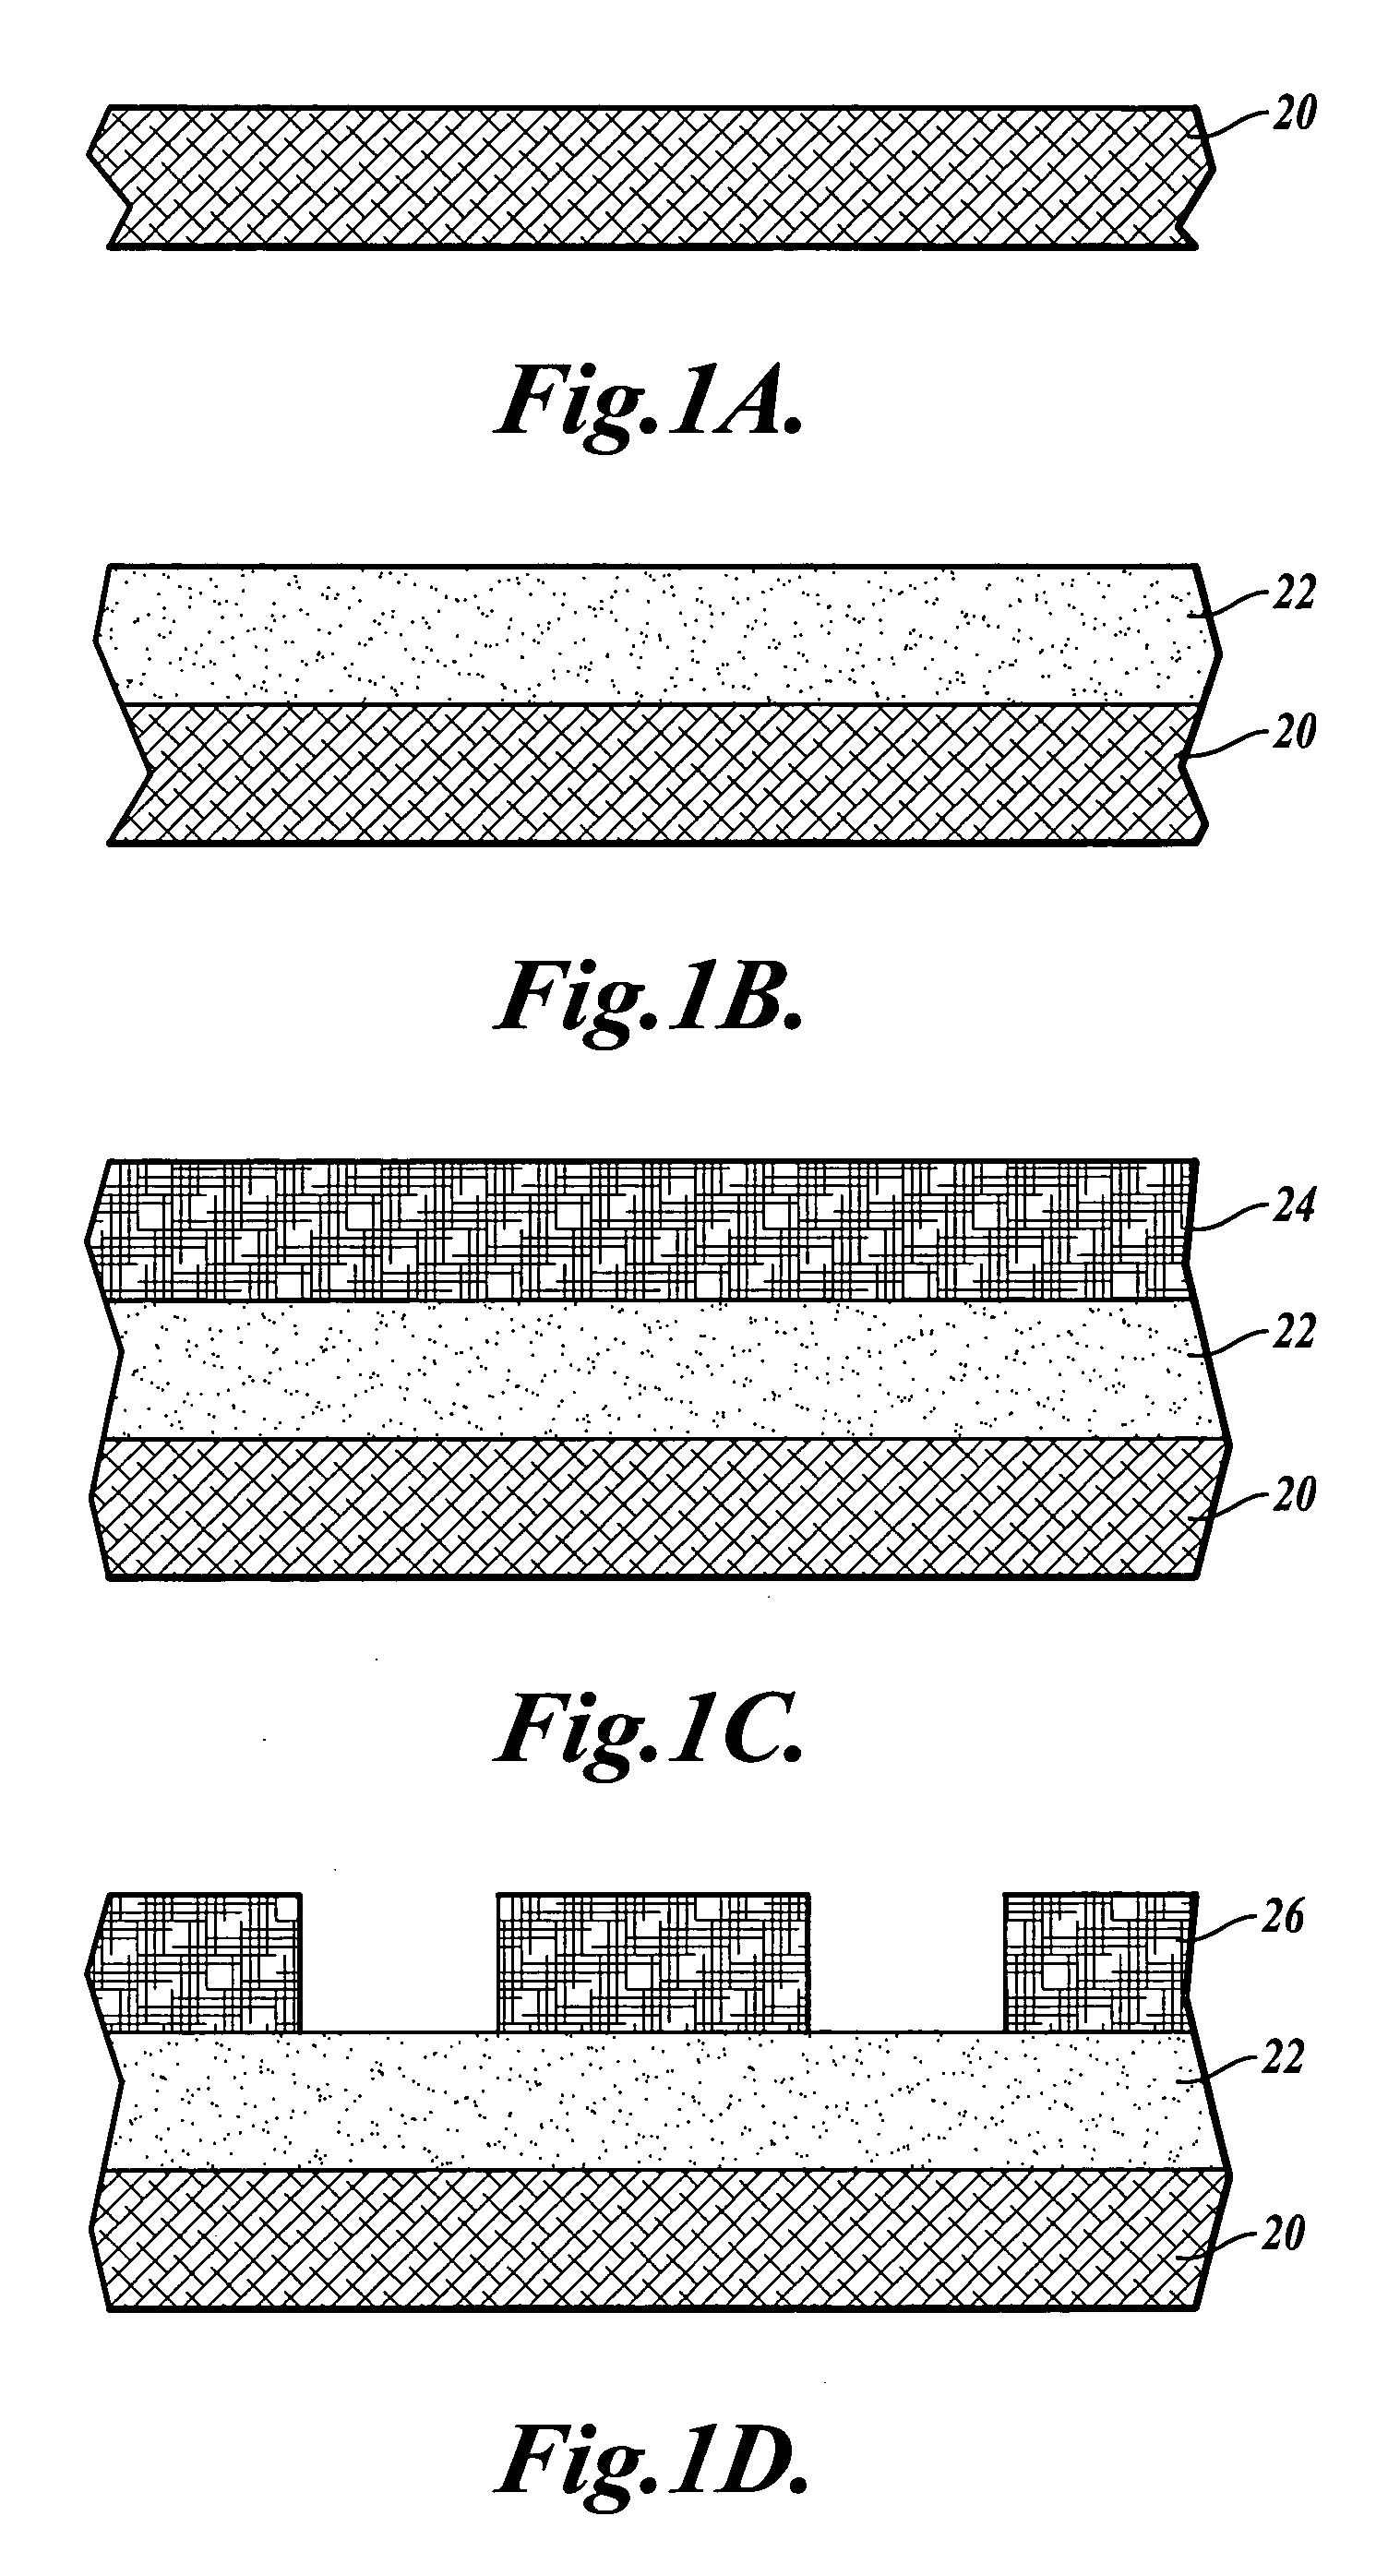 Baths, methods, and tools for superconformal deposition of conductive materials other than copper